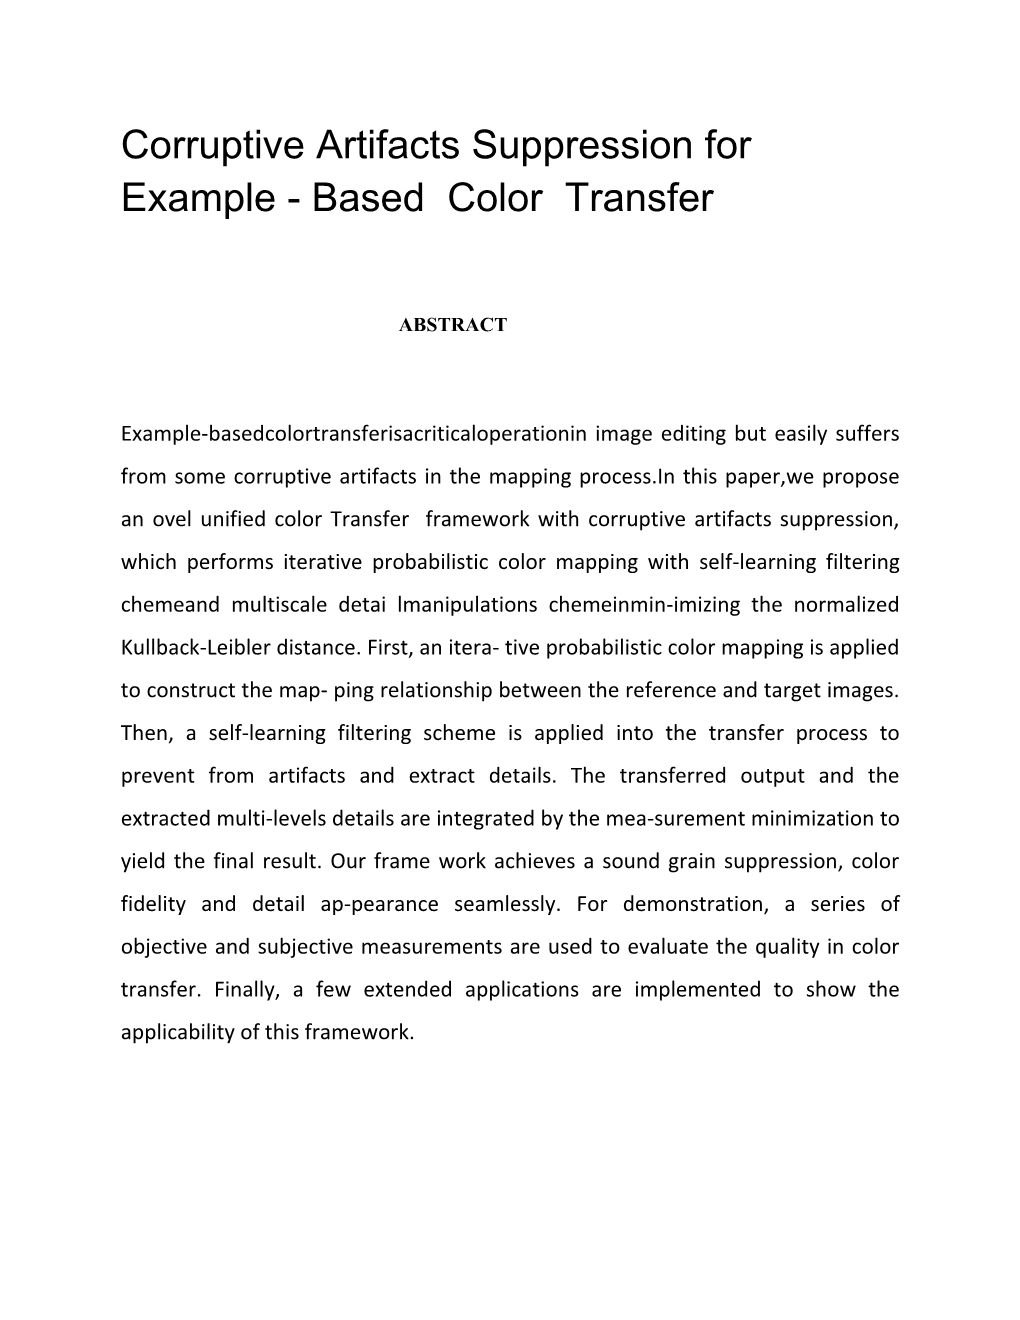 Corruptive Artifacts Suppression for Example-Based Color Transfer